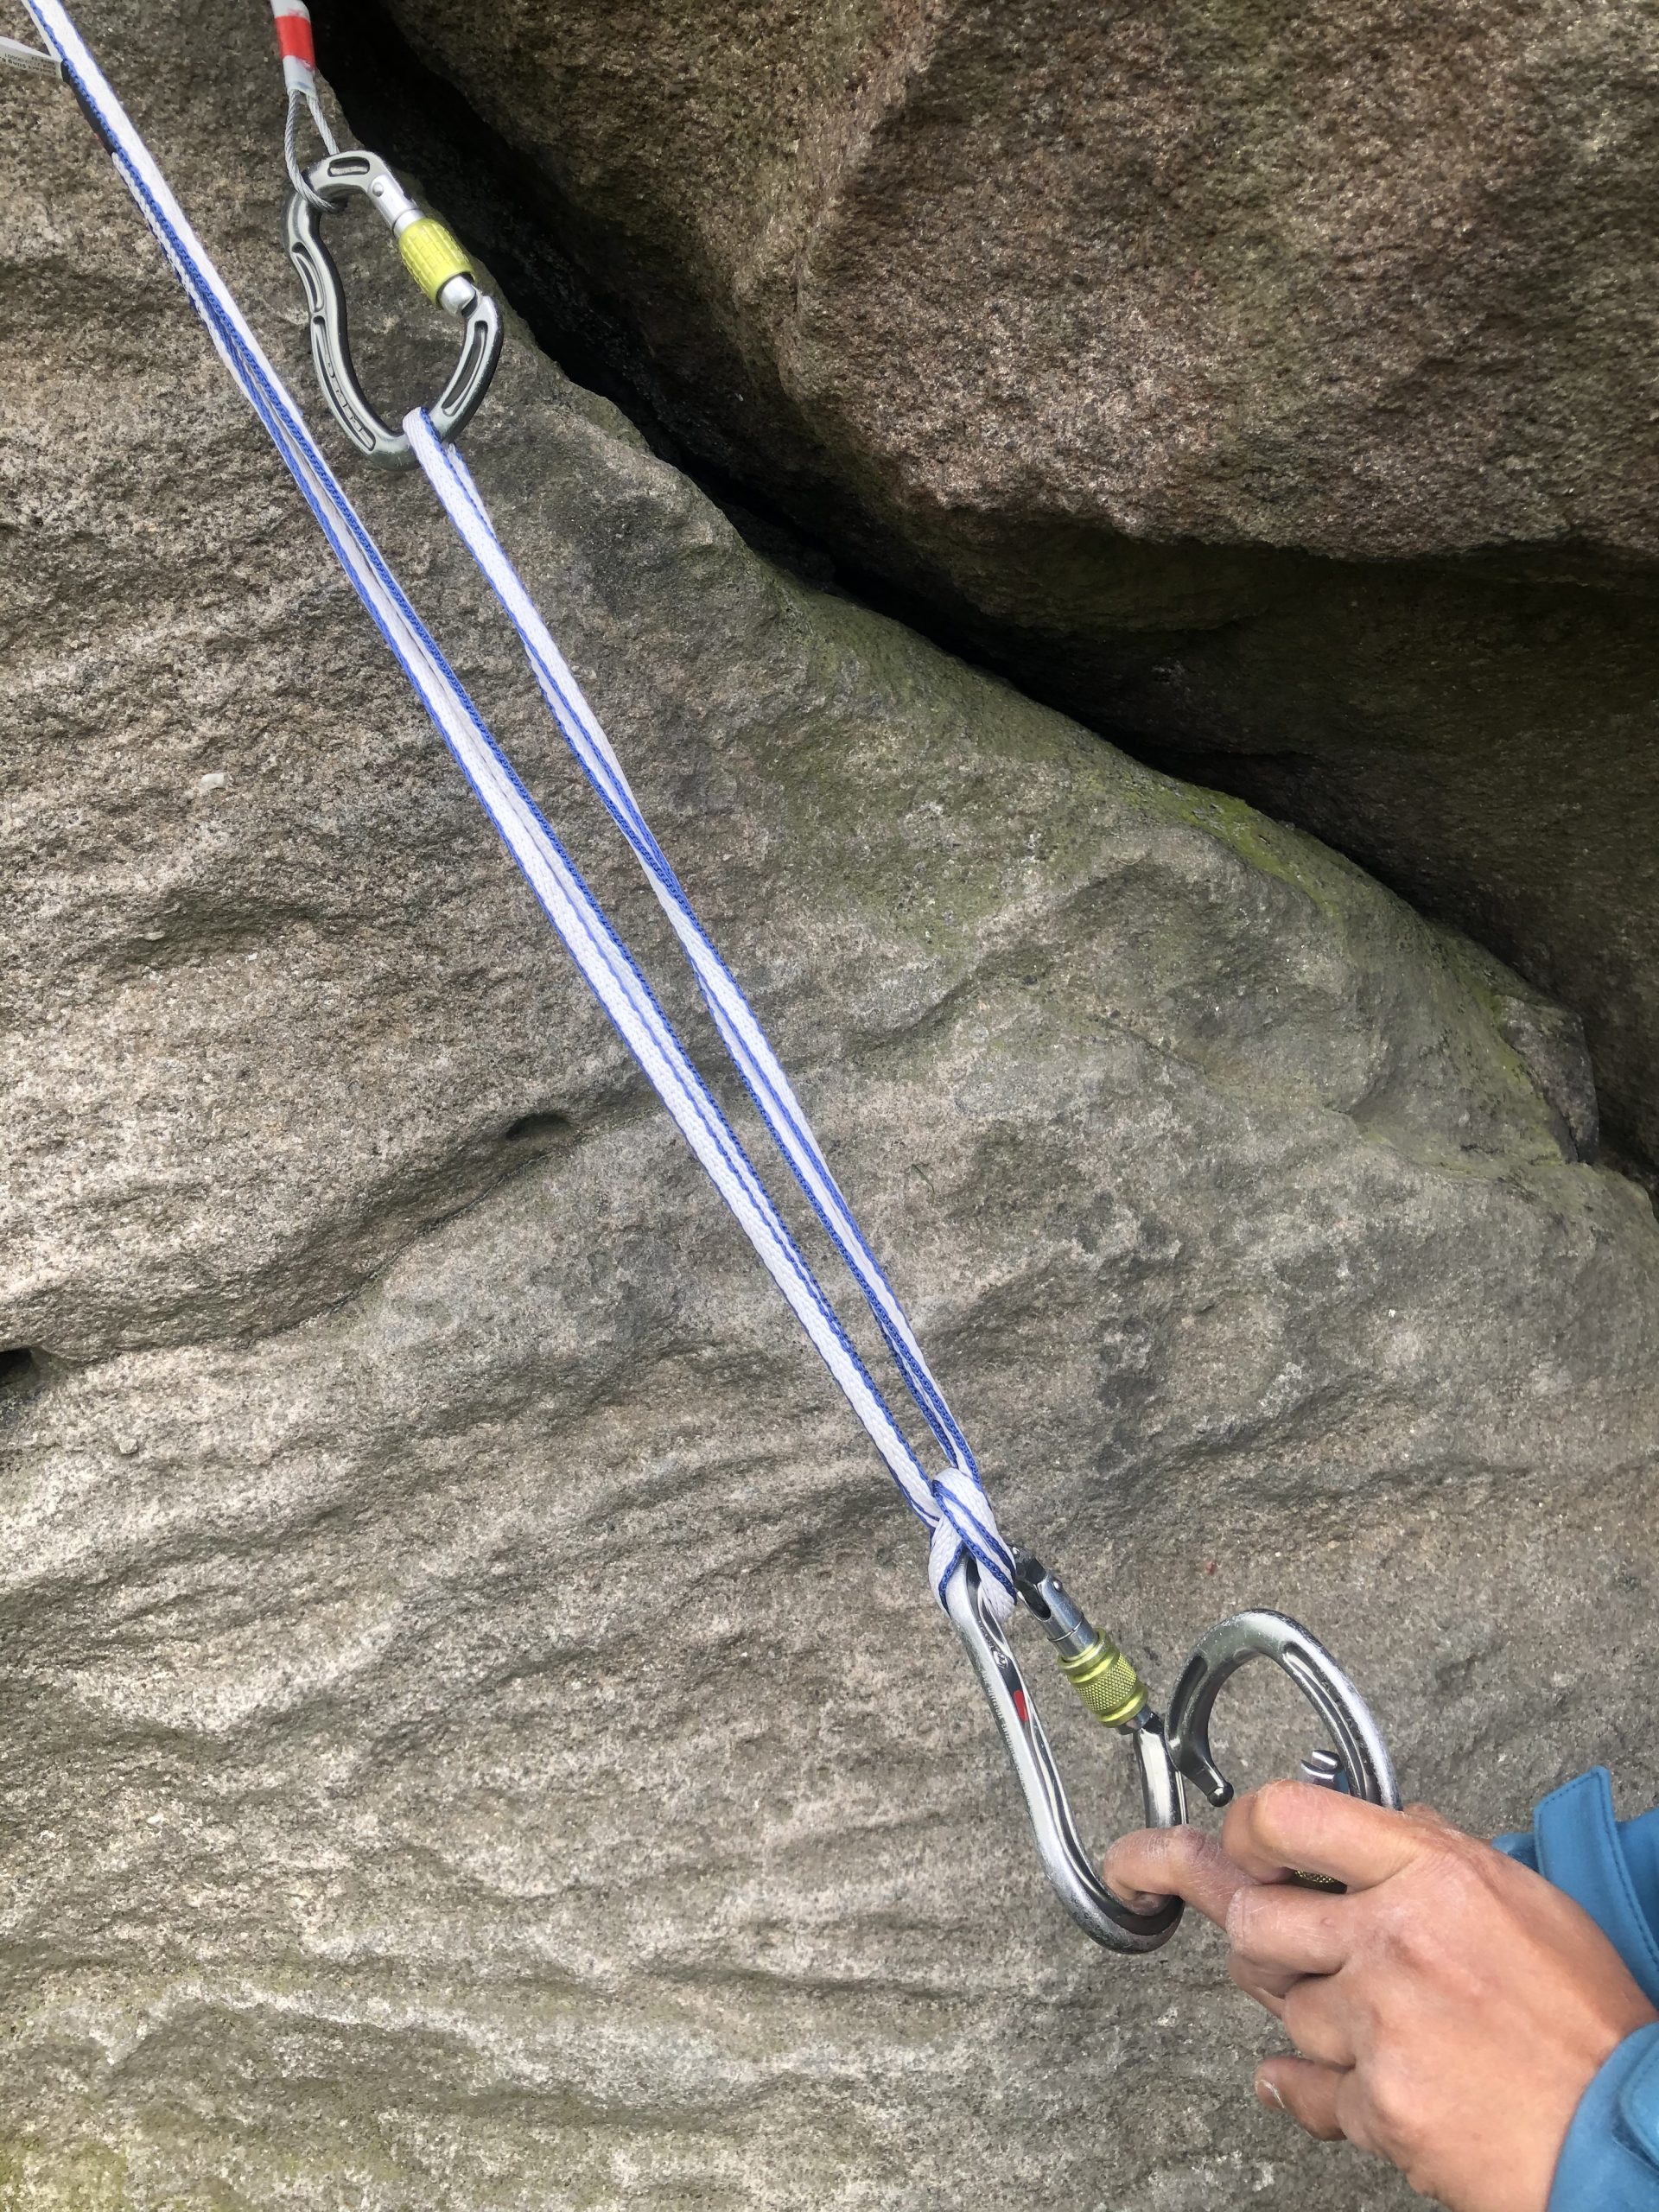 A method of attaching a climbing sling to two anchor points and then equalising the tension on both sides by using a clove hitch and karabiner to form a central power point ” width=